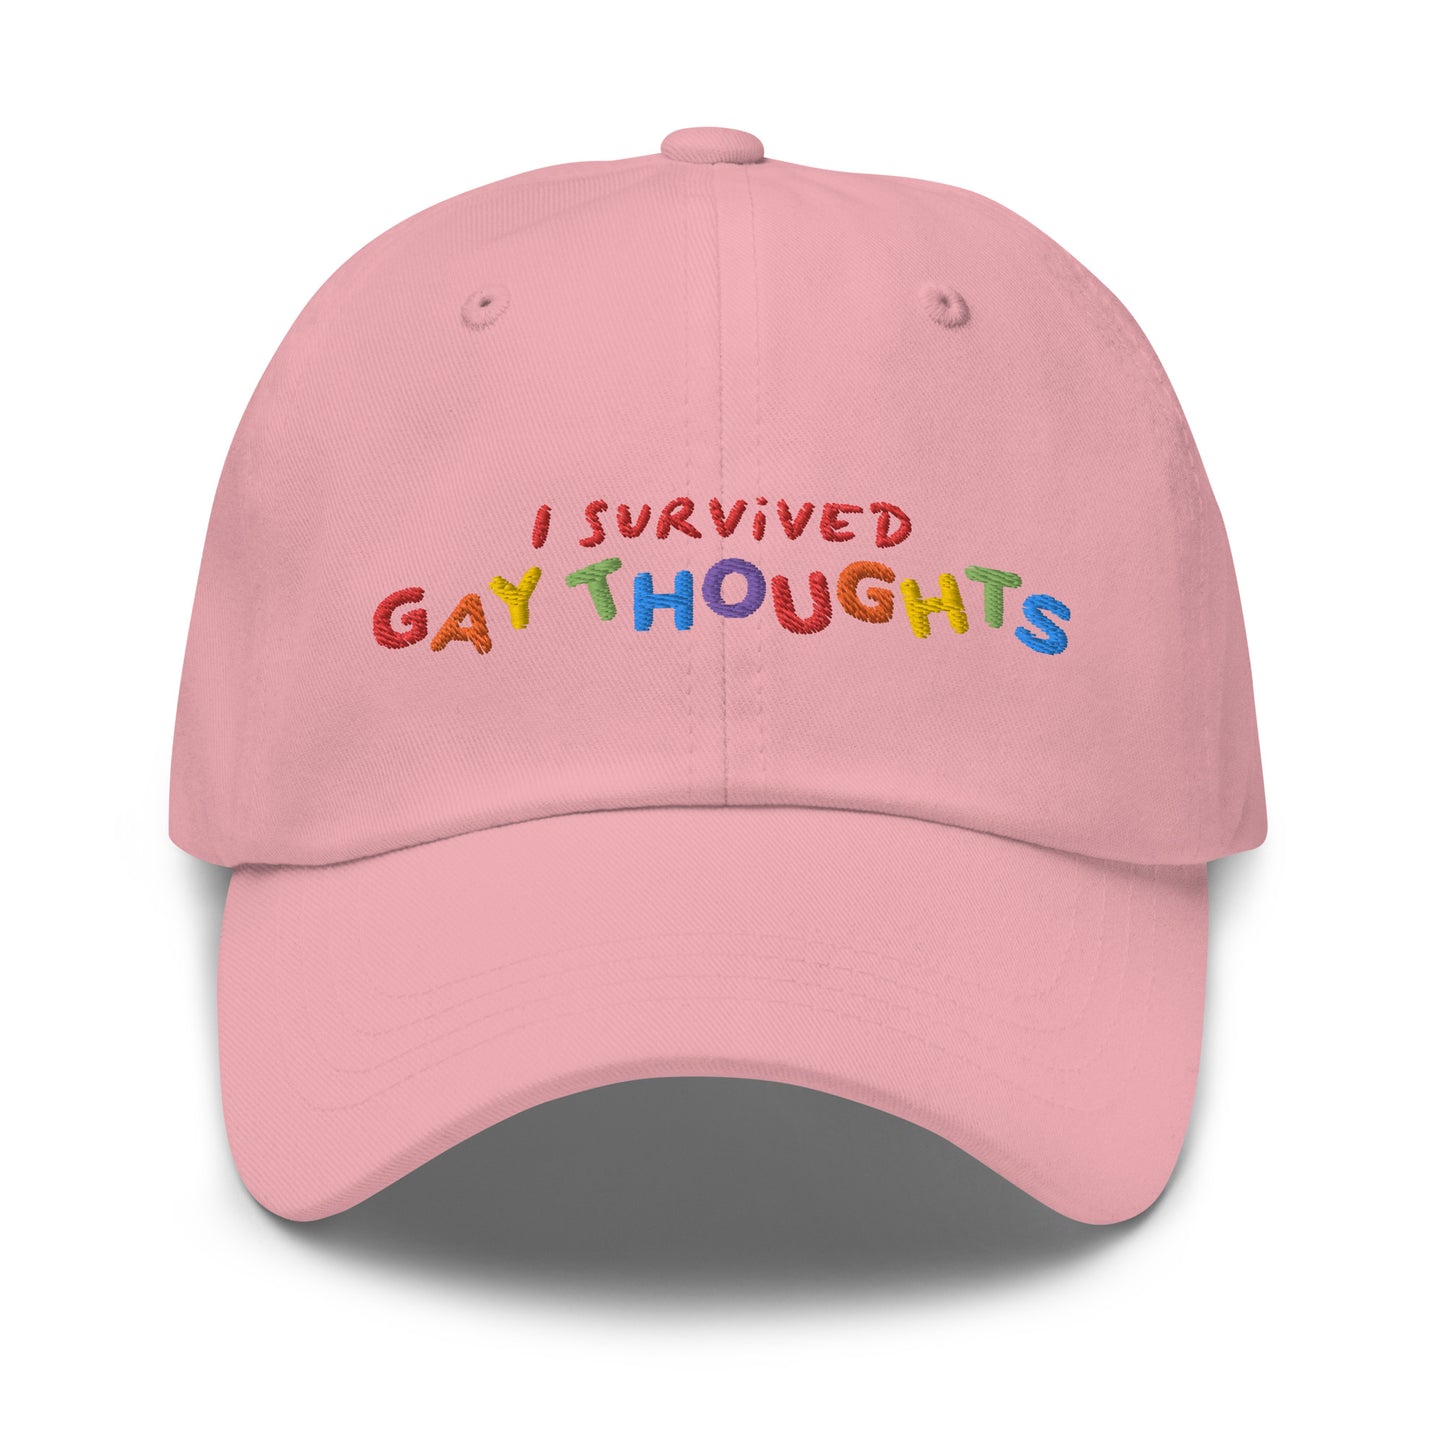 I Survived Gay Thoughts hat